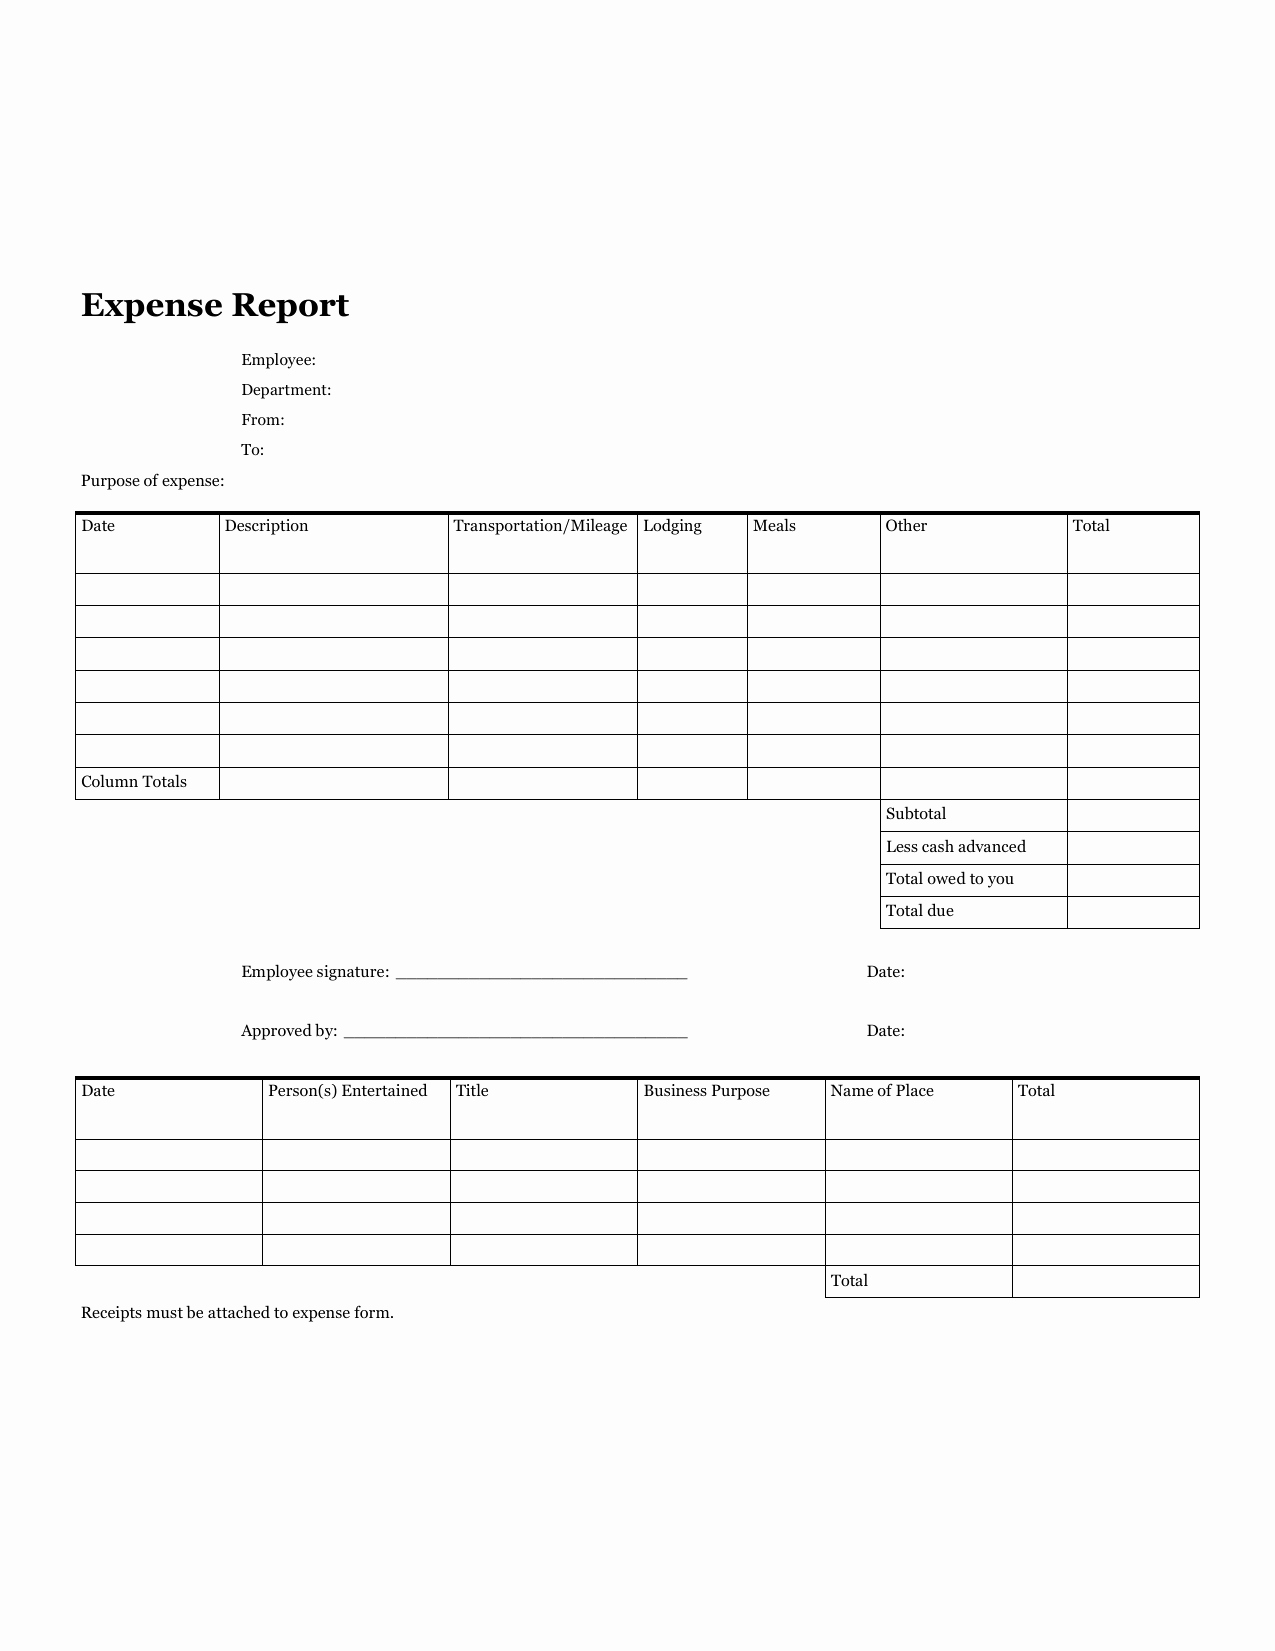 Free Printable Expense Report forms Fresh Download Blank Expense Report form Pdf